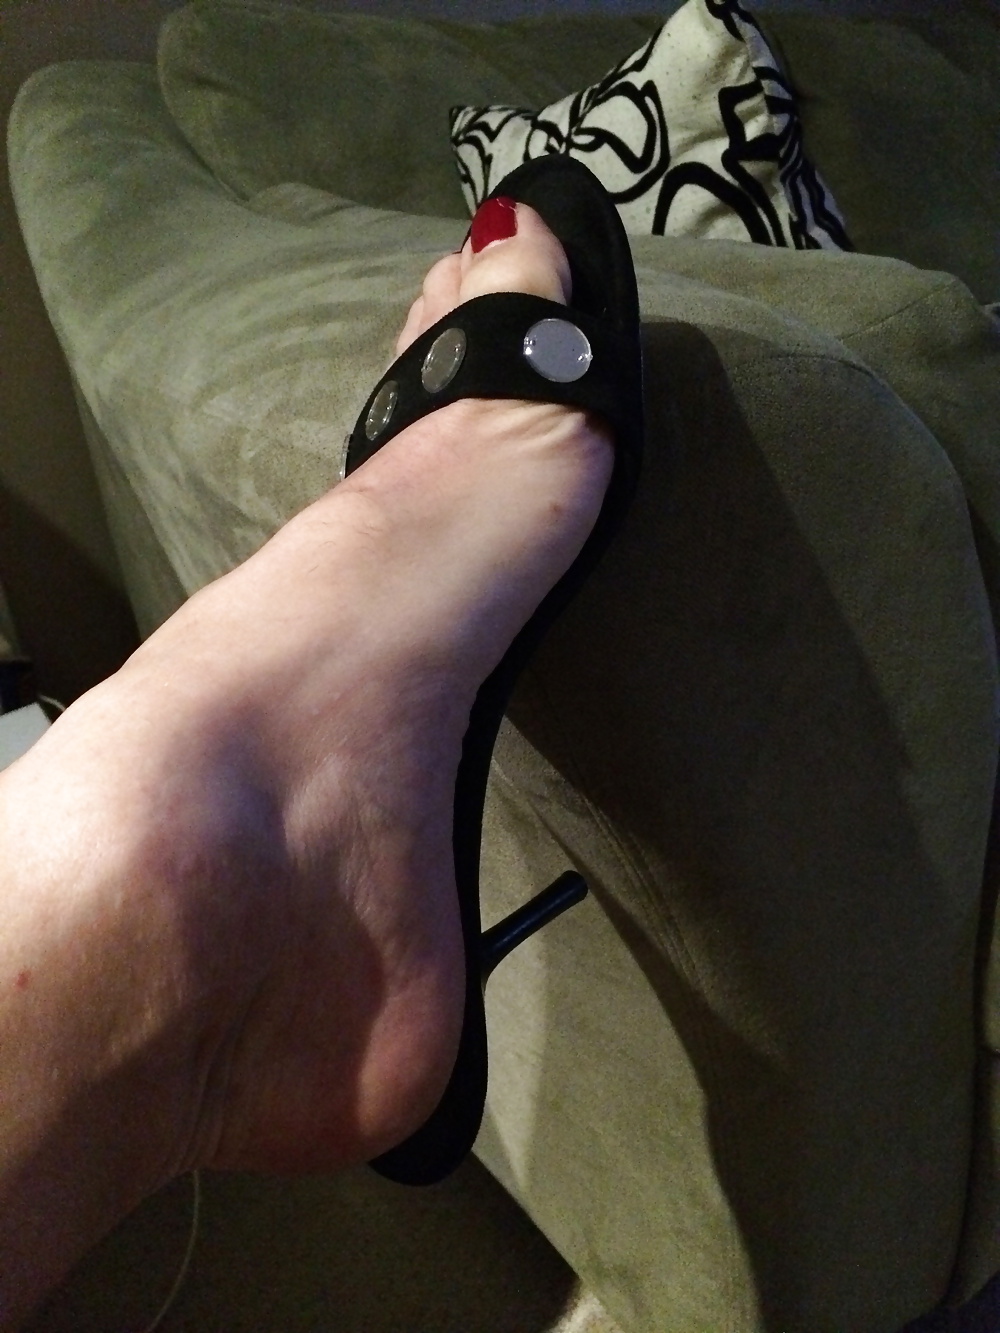 For the foot fetish #29225273